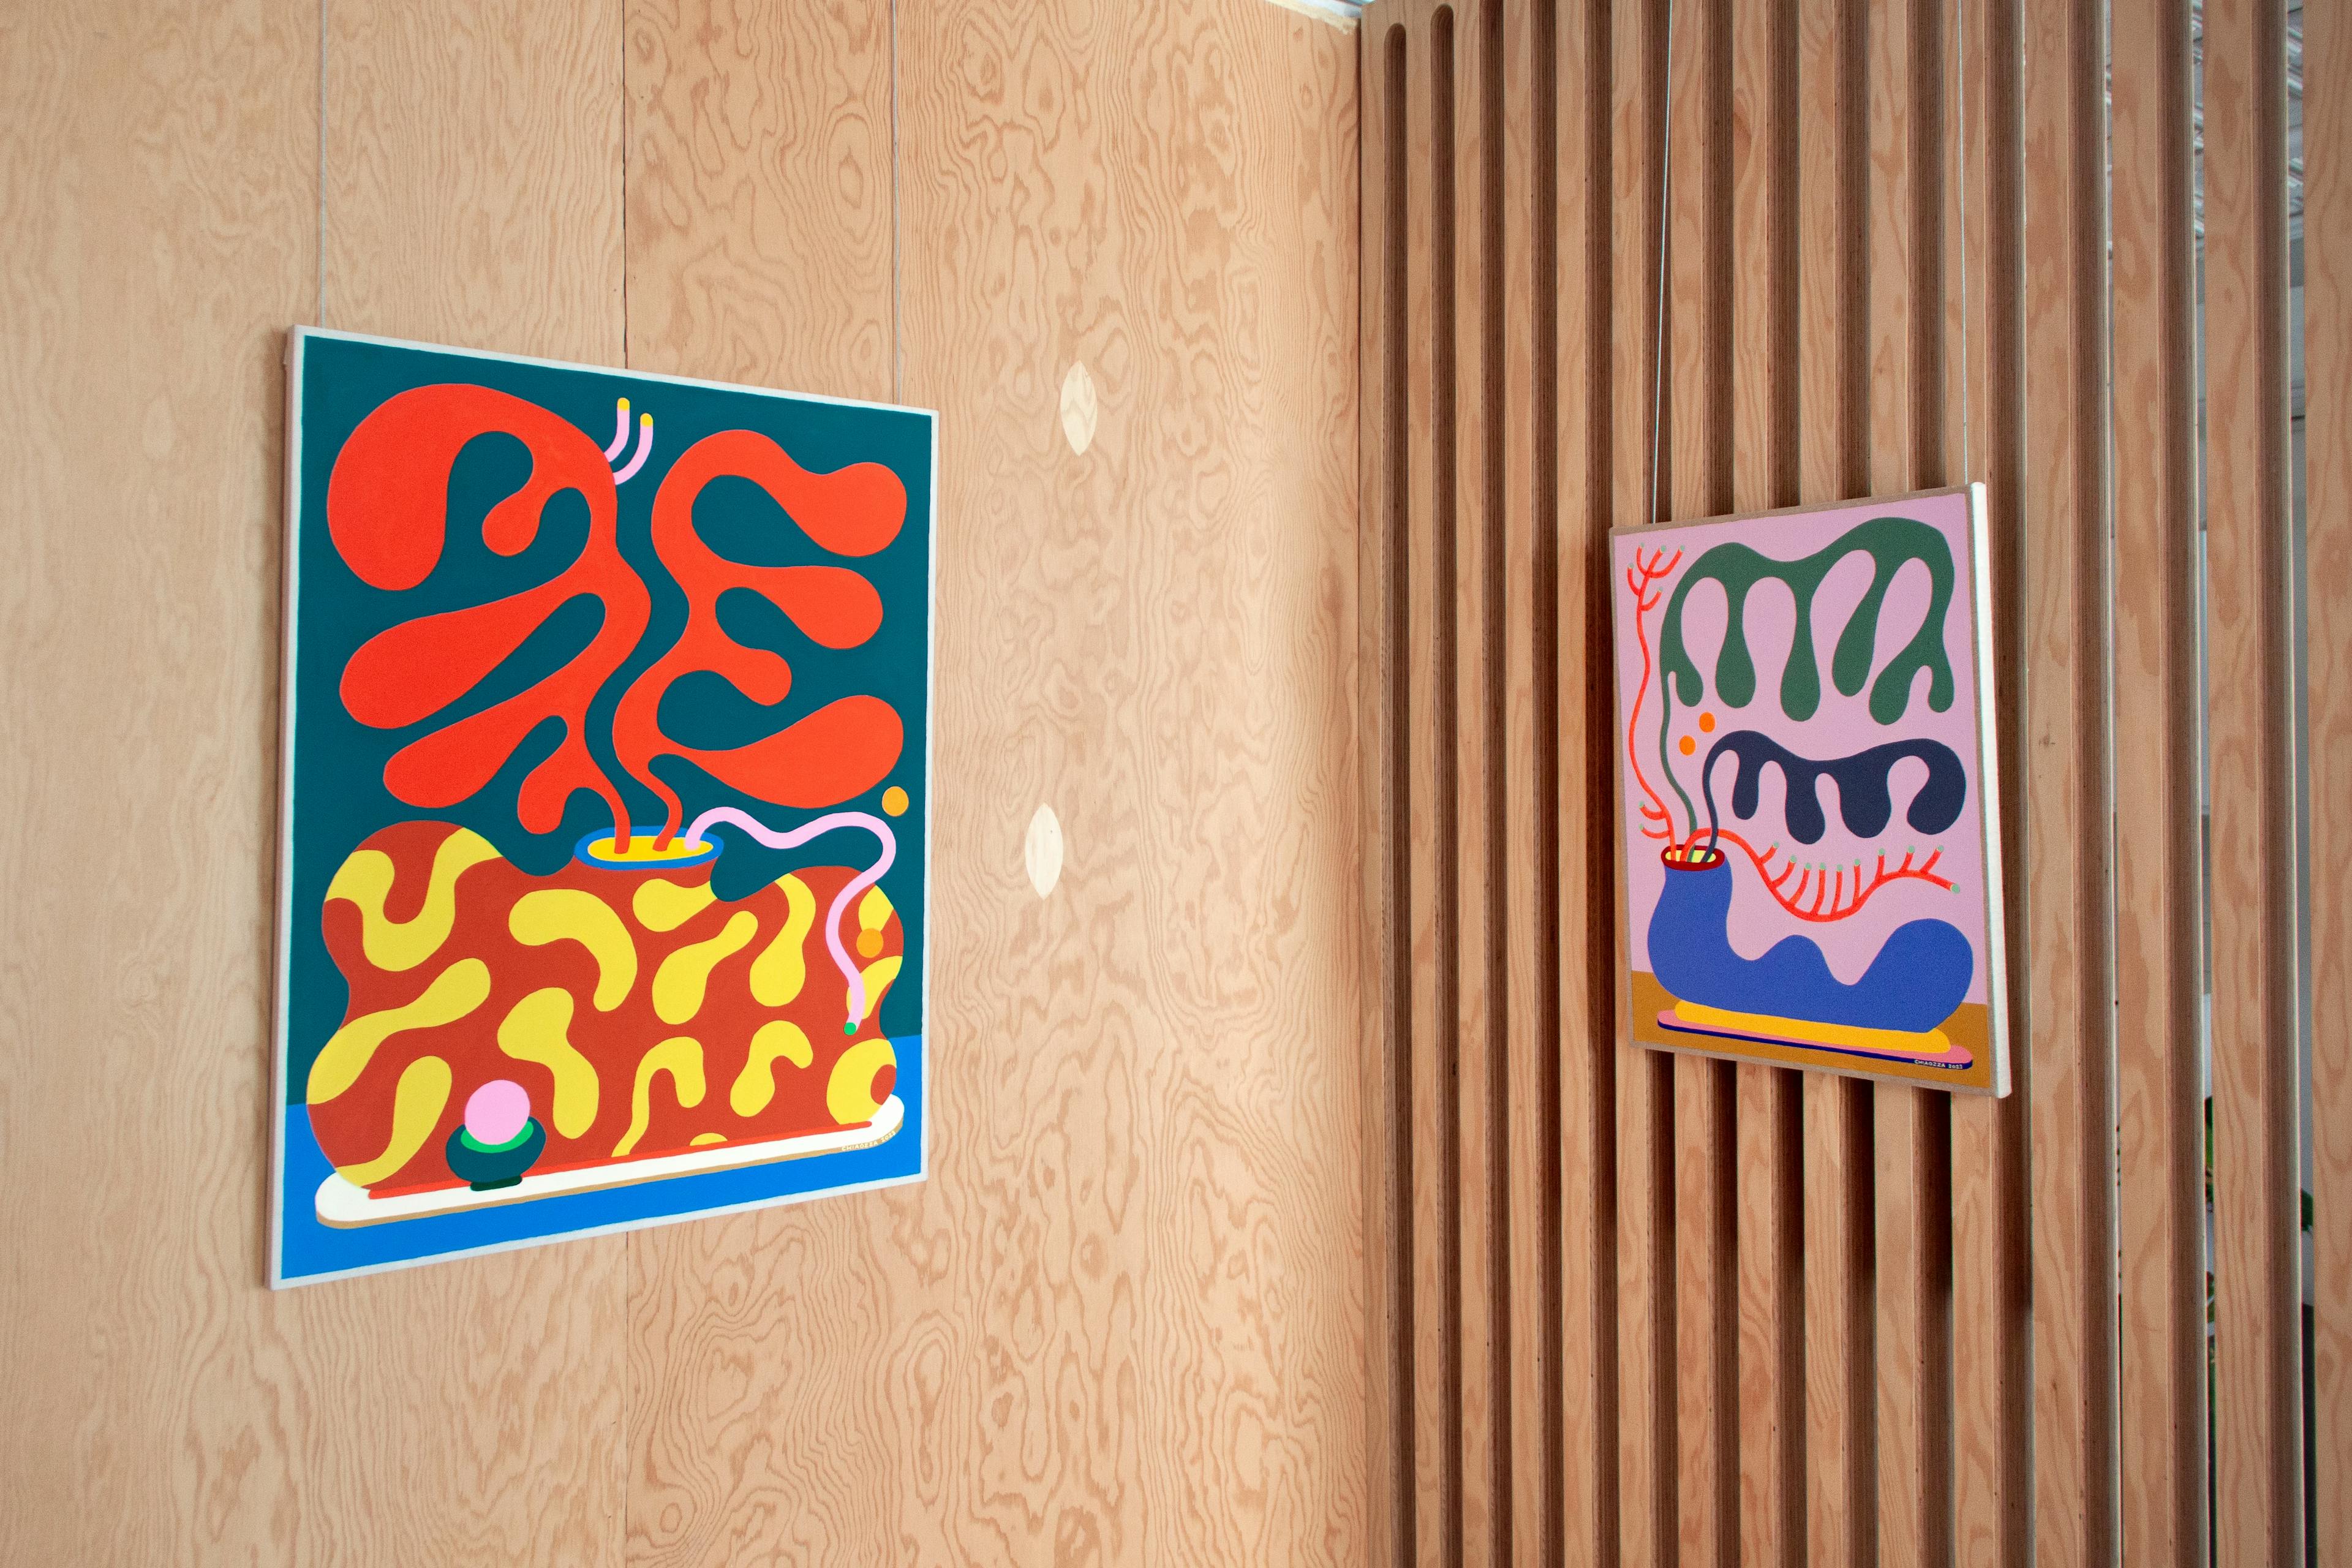 Colorful abstract paintings by Adam Frezza and Terri Chiao, known as CHIAOZZA, hang in a gallery for the exhibition Slow Growth.